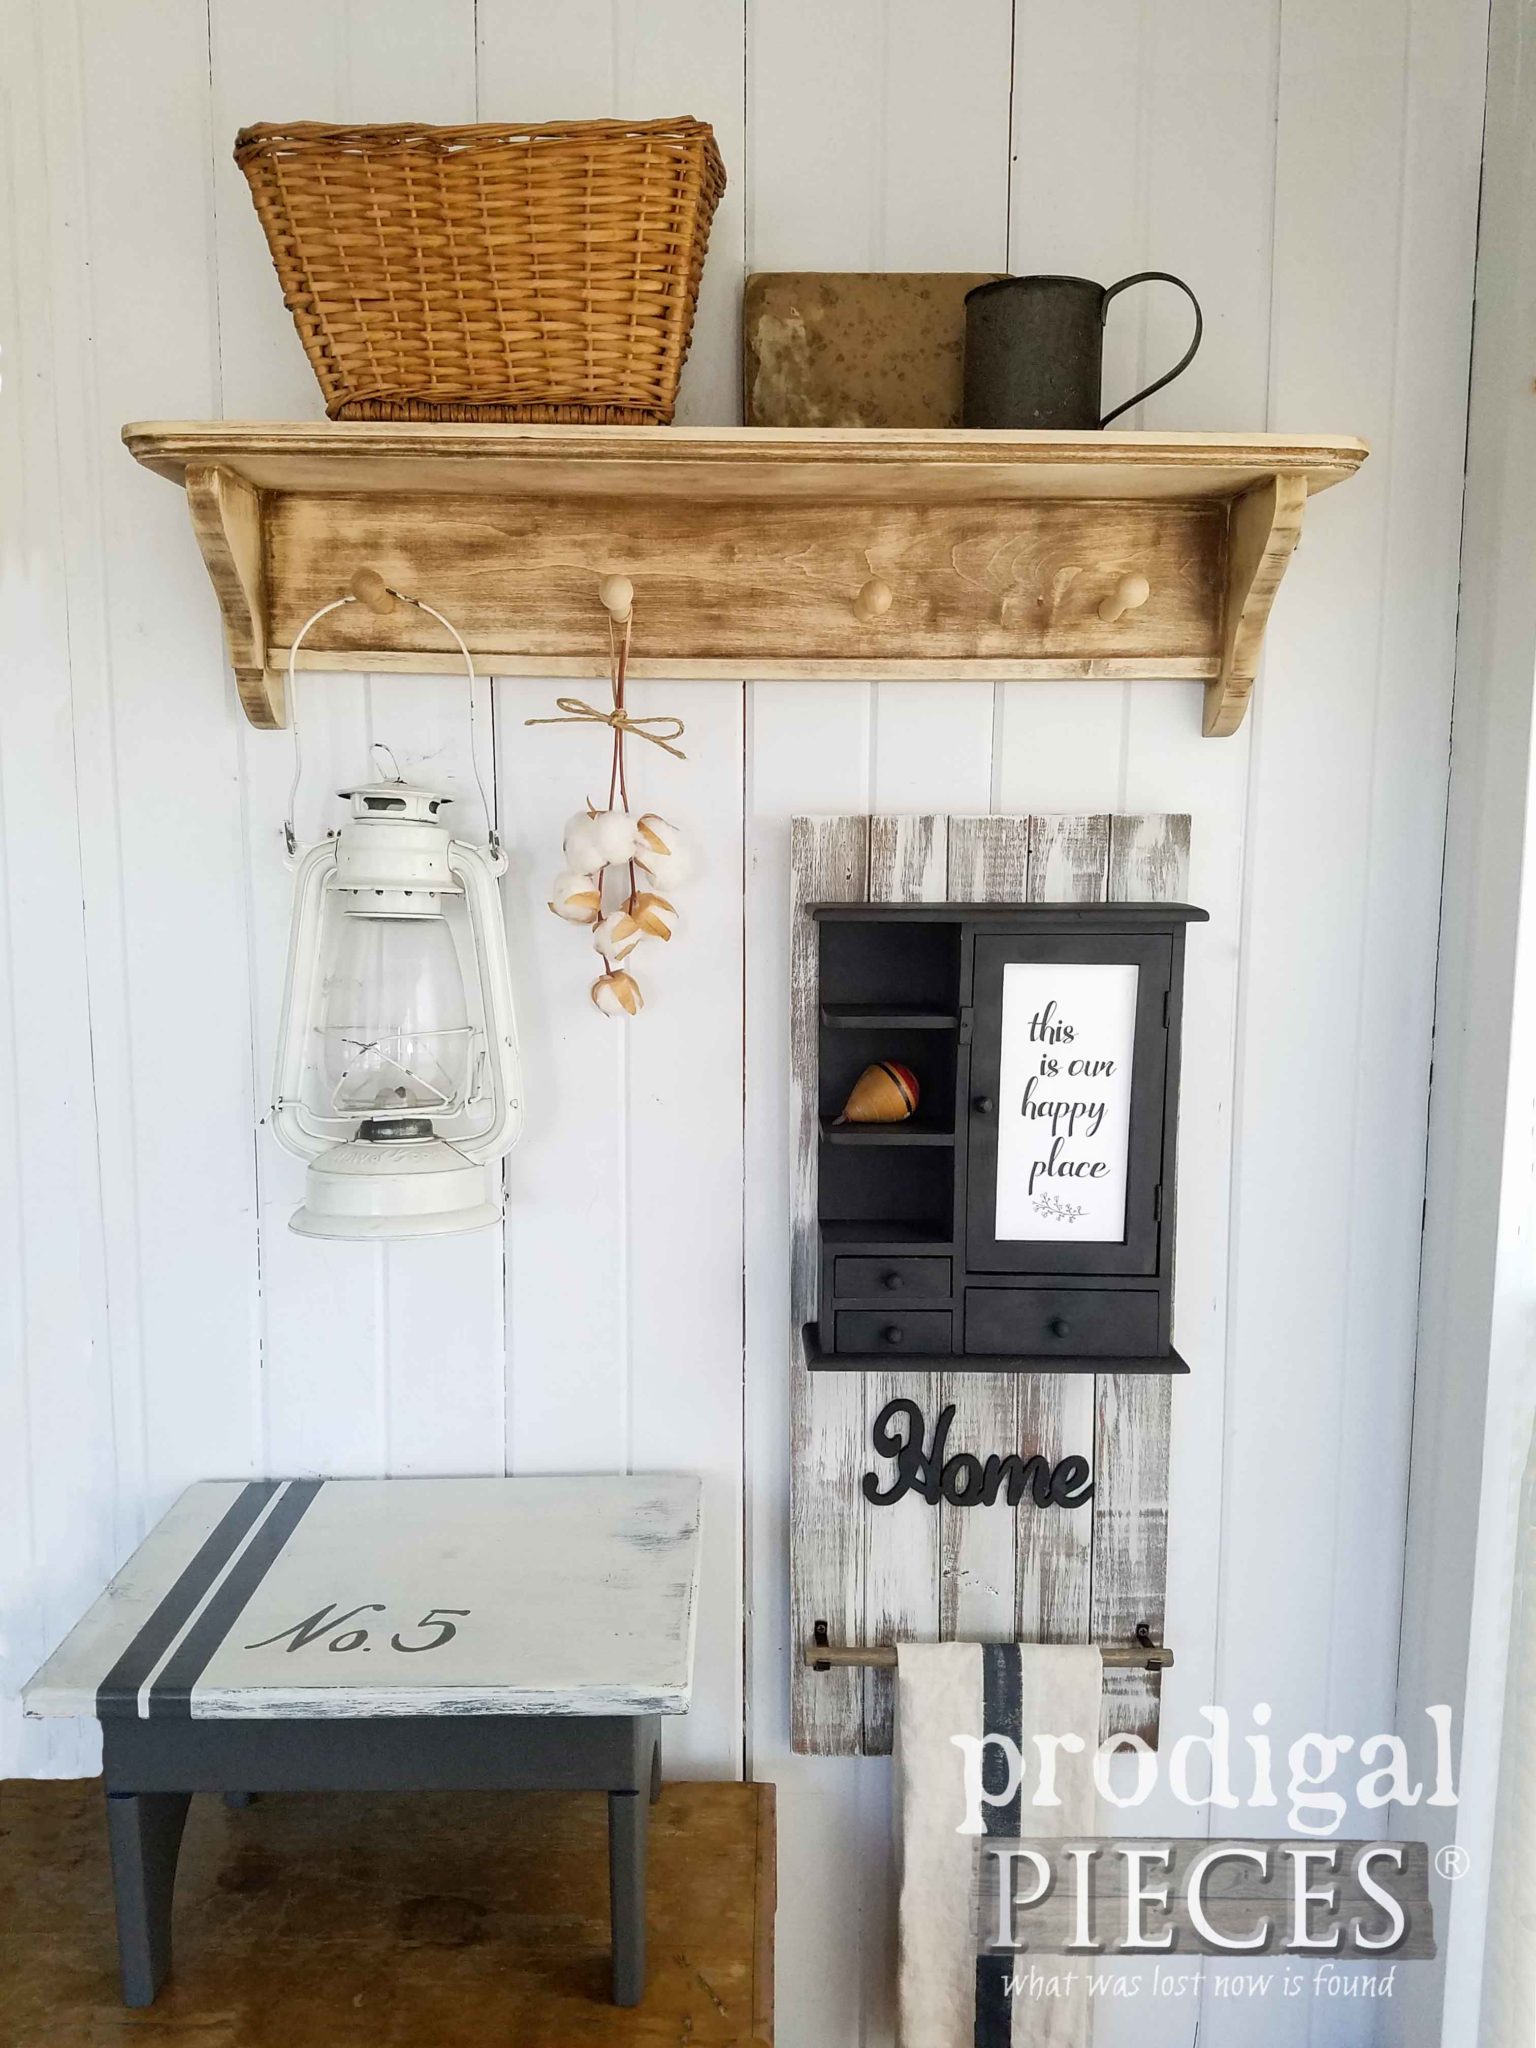 DIY Vignette Filled with Farmhouse Decor from Thrifted Finds by Larissa of Prodigal Pieces | prodigalpieces.com